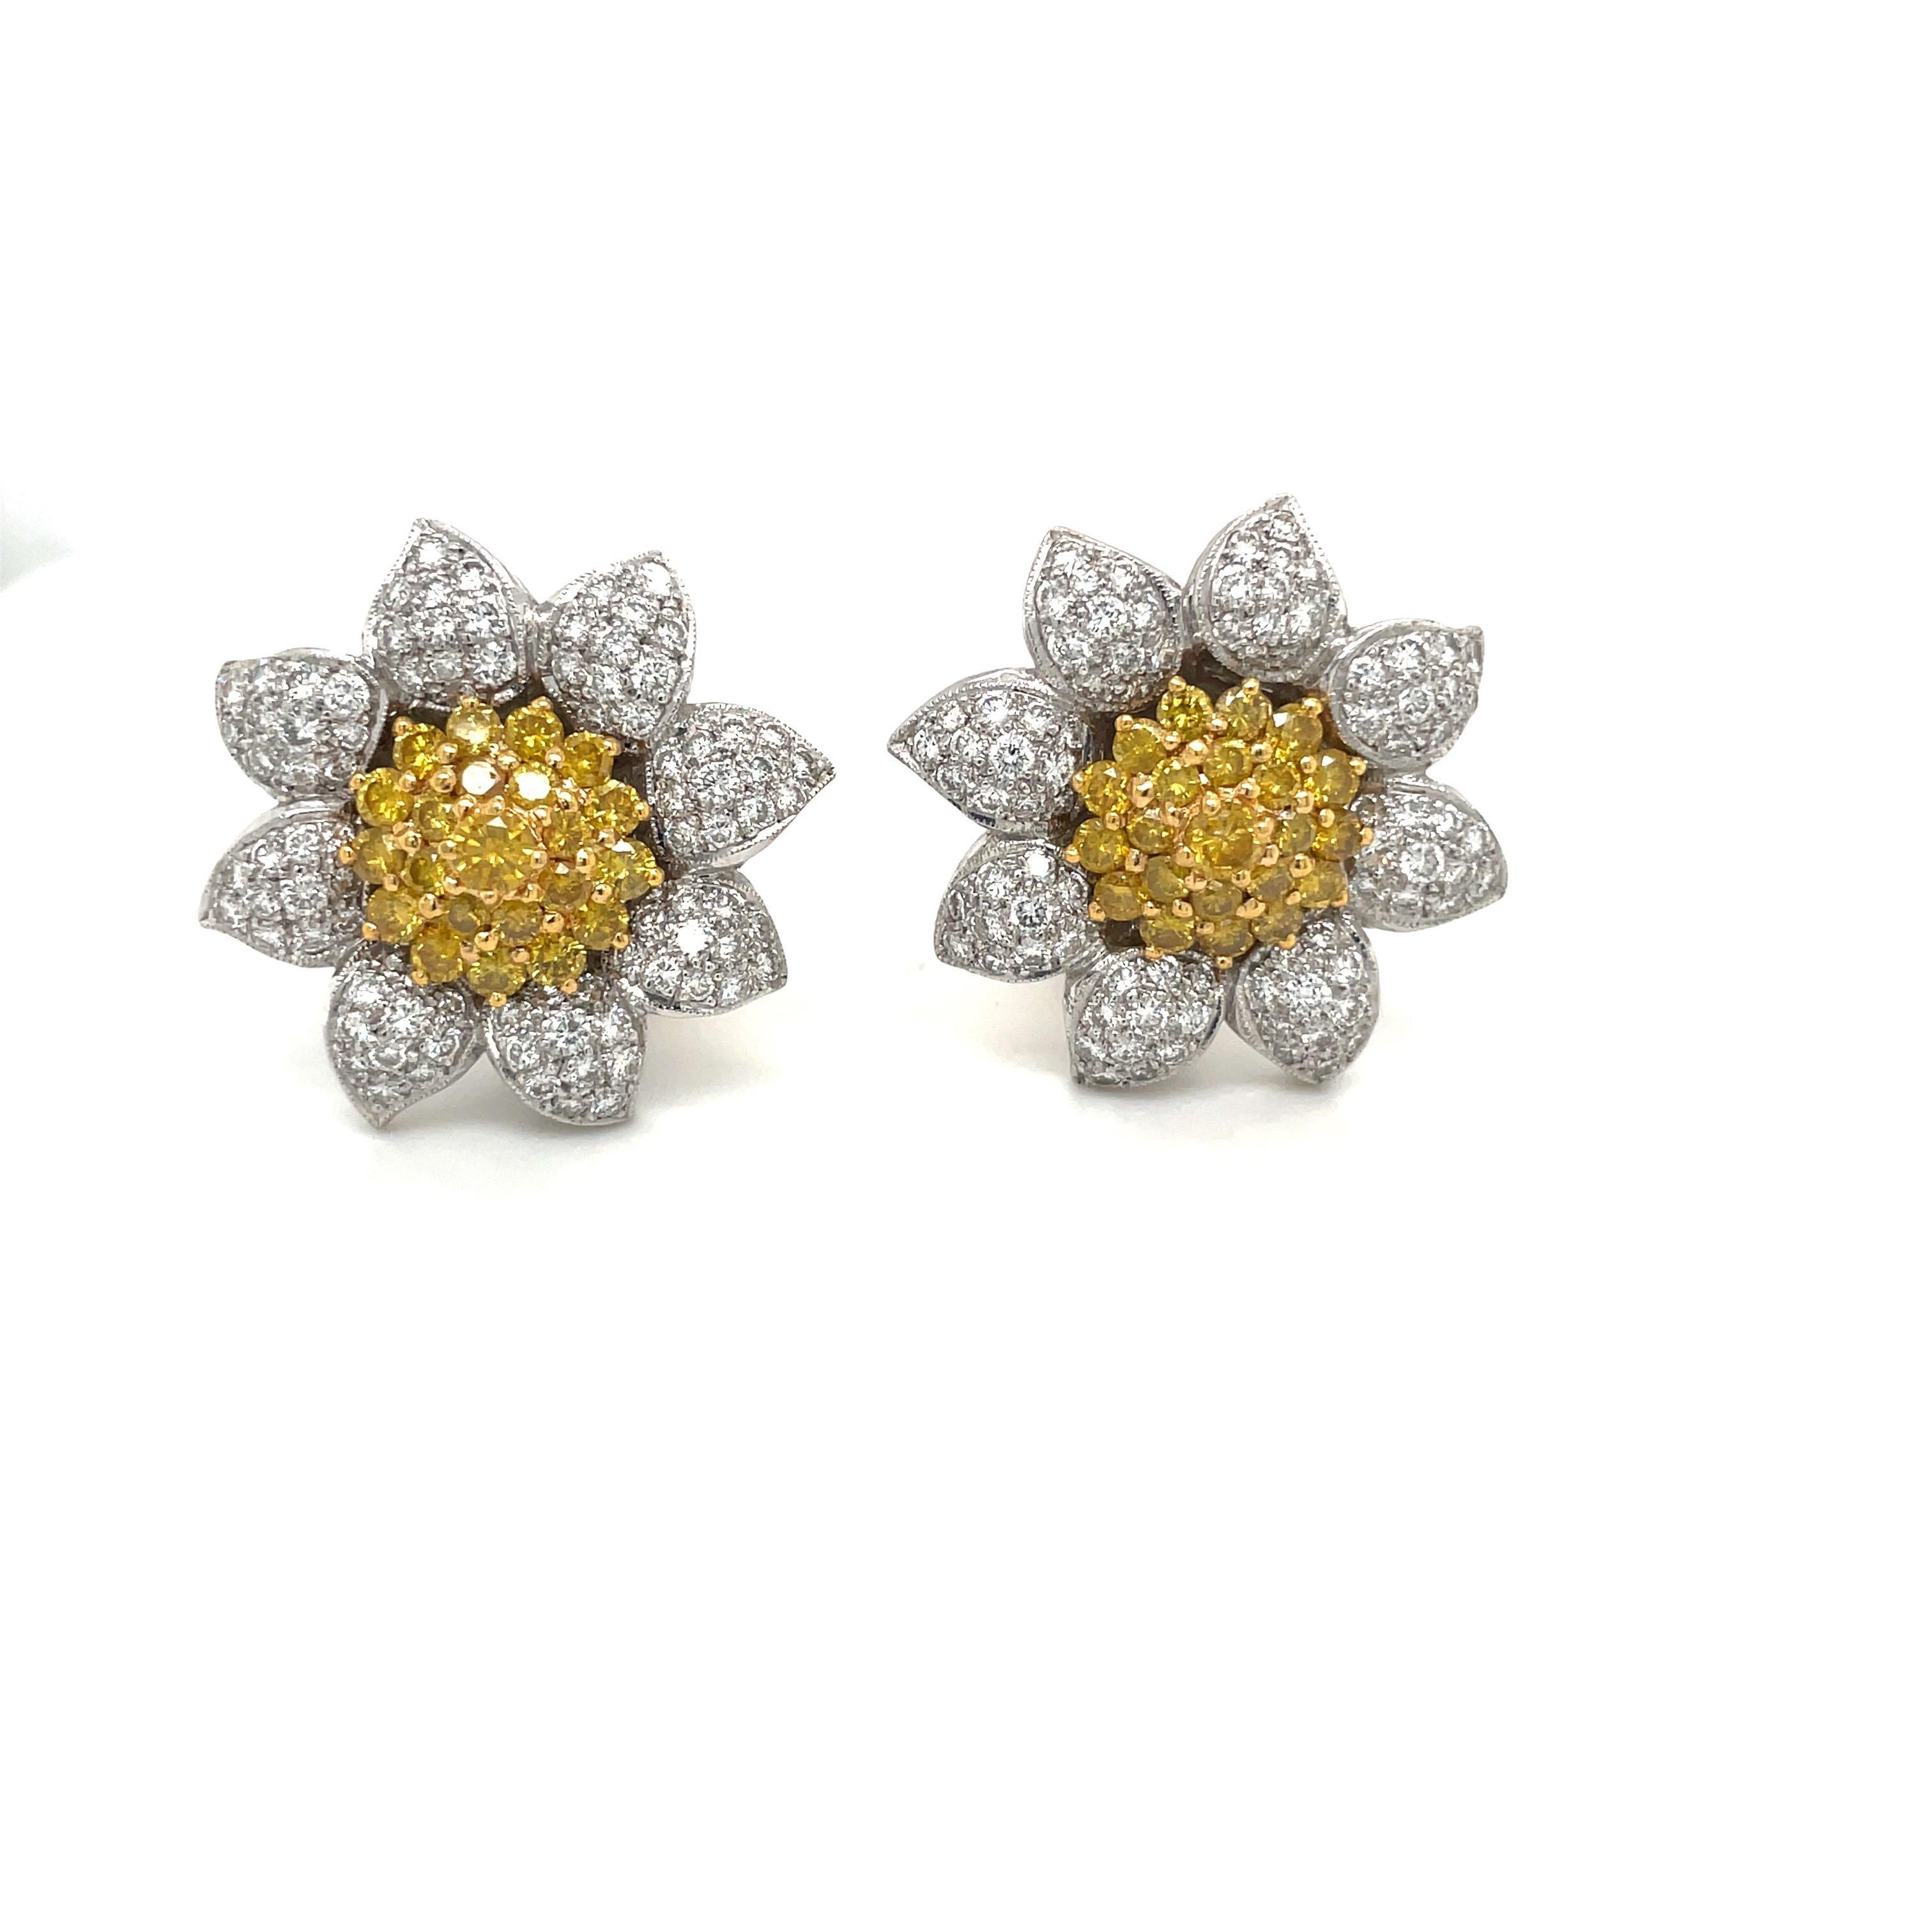 These charming flower earrings are comprised of 3.03 carats of brilliant white diamond pave set in the domed petals, surrounding an individually-set cluster of round fancy yellow diamonds, weighing a total of 2.32Ct.
The earrings have a flexible